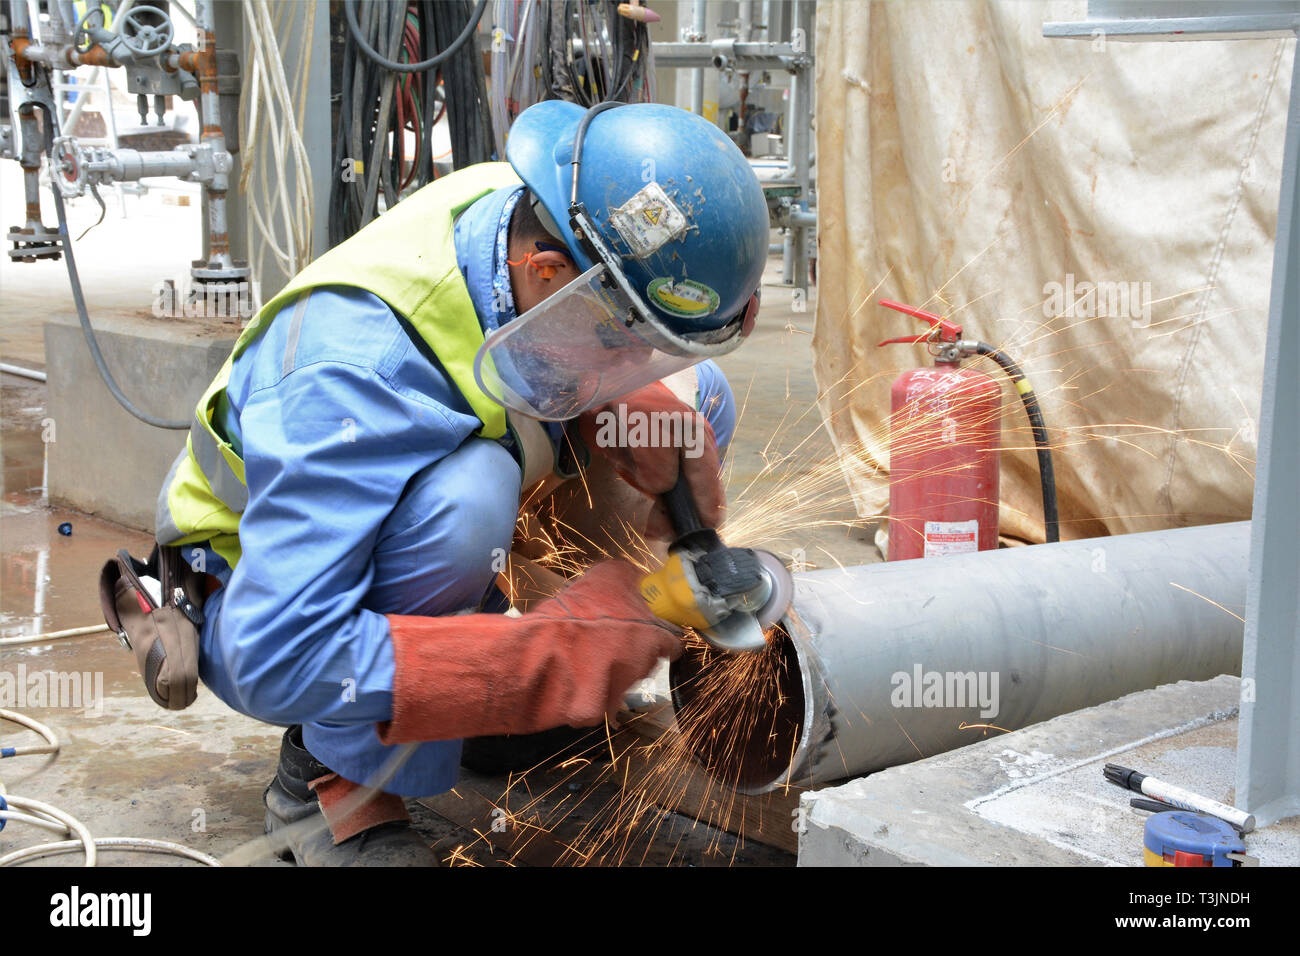 (190410) -- AL AHMADI GOVERNORATE, April 10, 2019 (Xinhua) -- An employee of China Petrochemical Corporation (Sinopec) Fifth Construction Company works at the construction site of the Kuwait New Refinery Project in Al Ahmadi Governorate, Kuwait, April 7, 2019. TO GO WITH Feature: Chinese oil refiner builds Chinese brand in Kuwait (Xinhua/Li Jinxue) Stock Photo